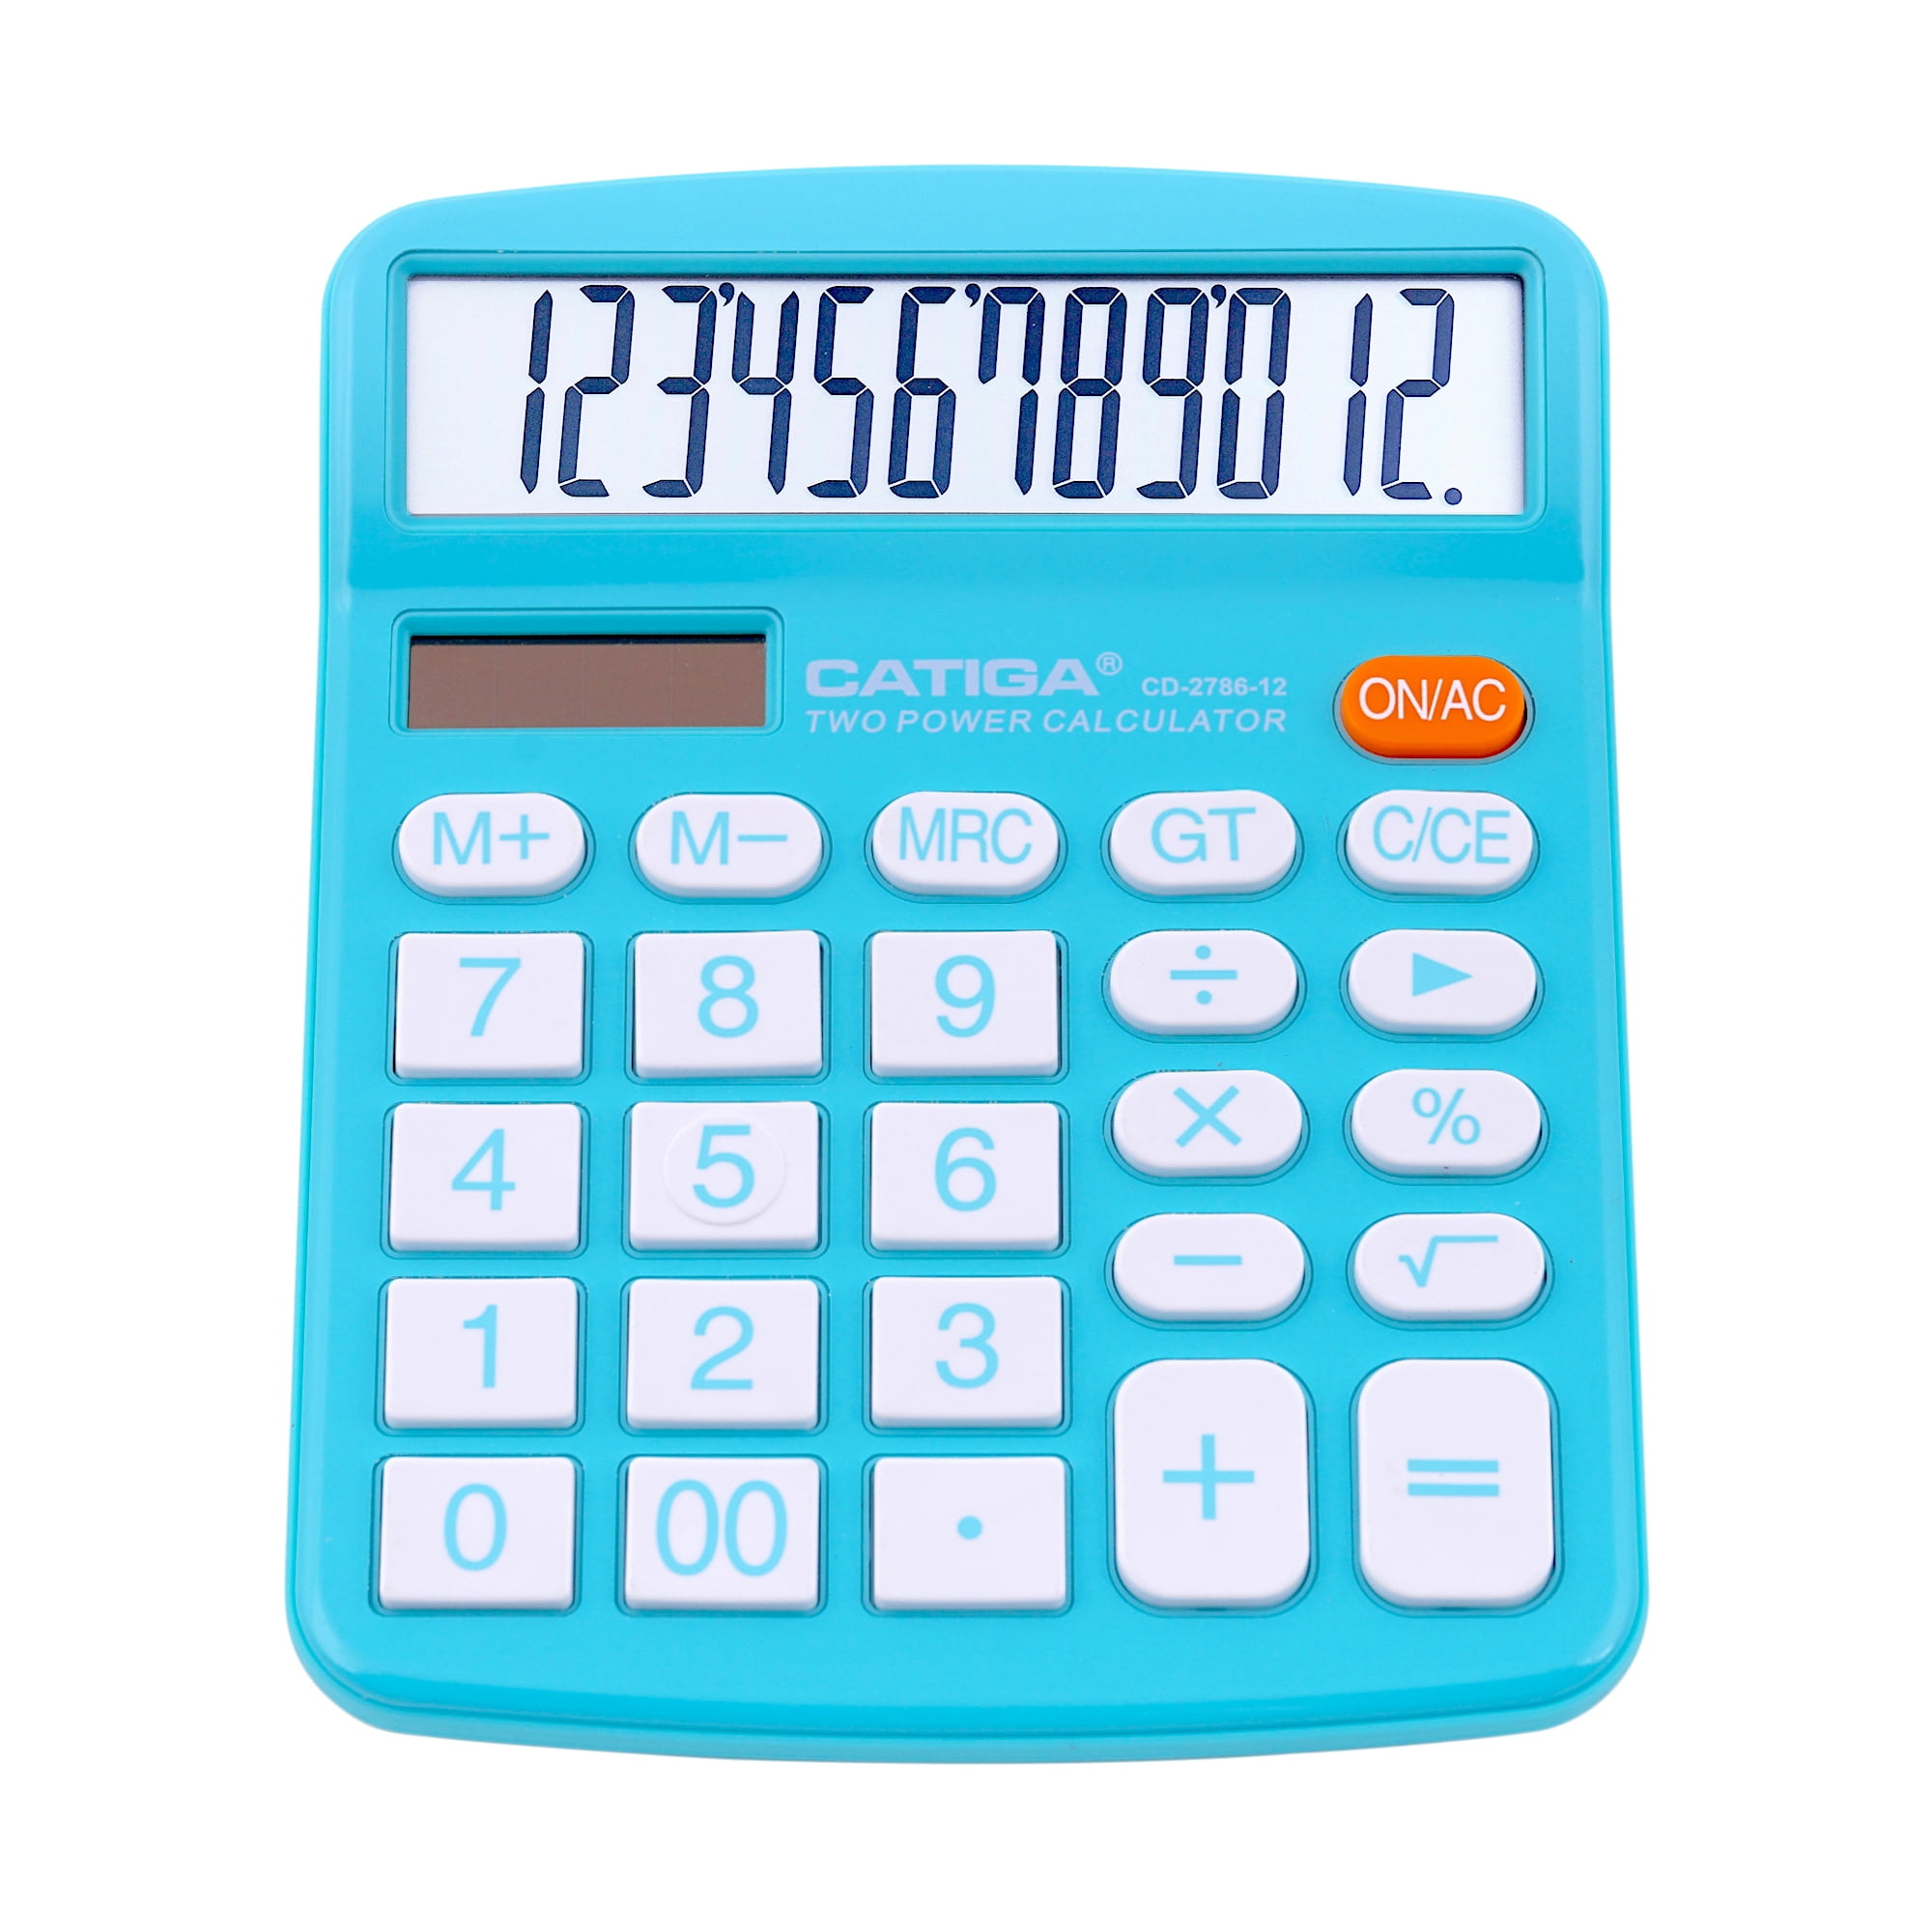 GUOQIAO ✯Slim LCD 8-Digit Display Clear Screen Solar Calculator for School Office